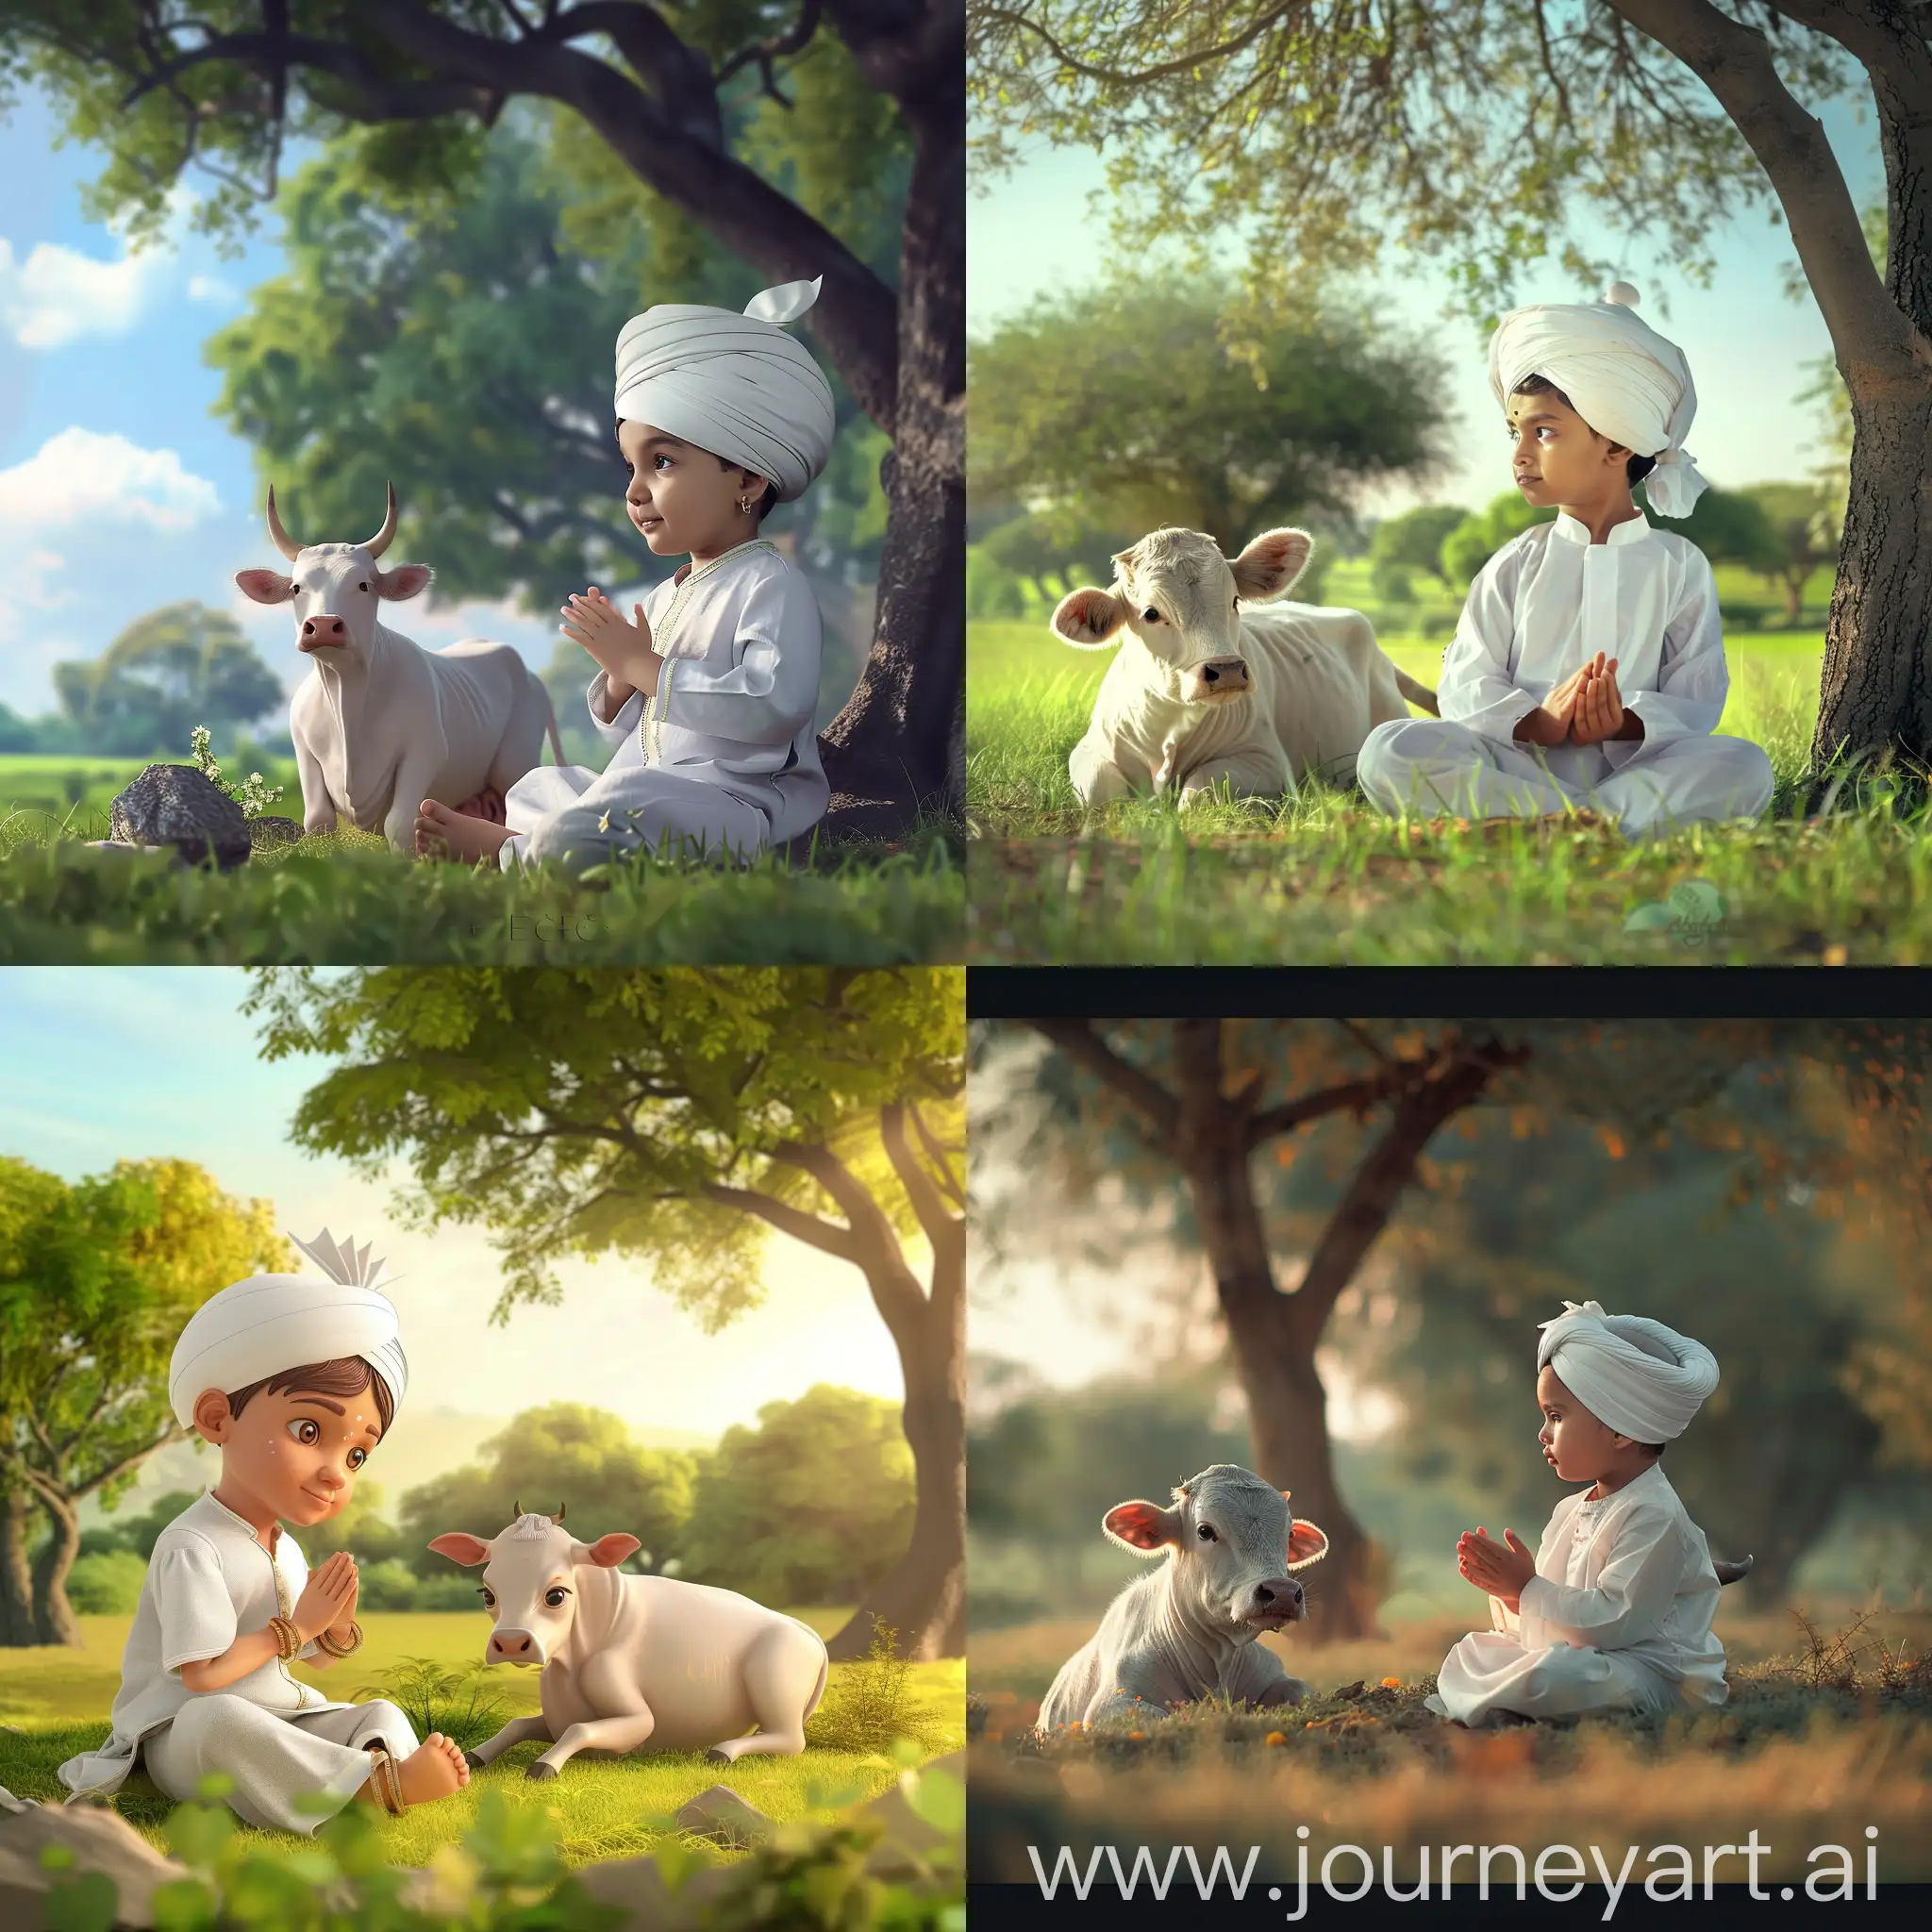 A village child wearing a white kurta panjama with white turban on head with folding hands sitting near a cute white cow under a beautiful trees in a green field animated morning view facing left side, HD view